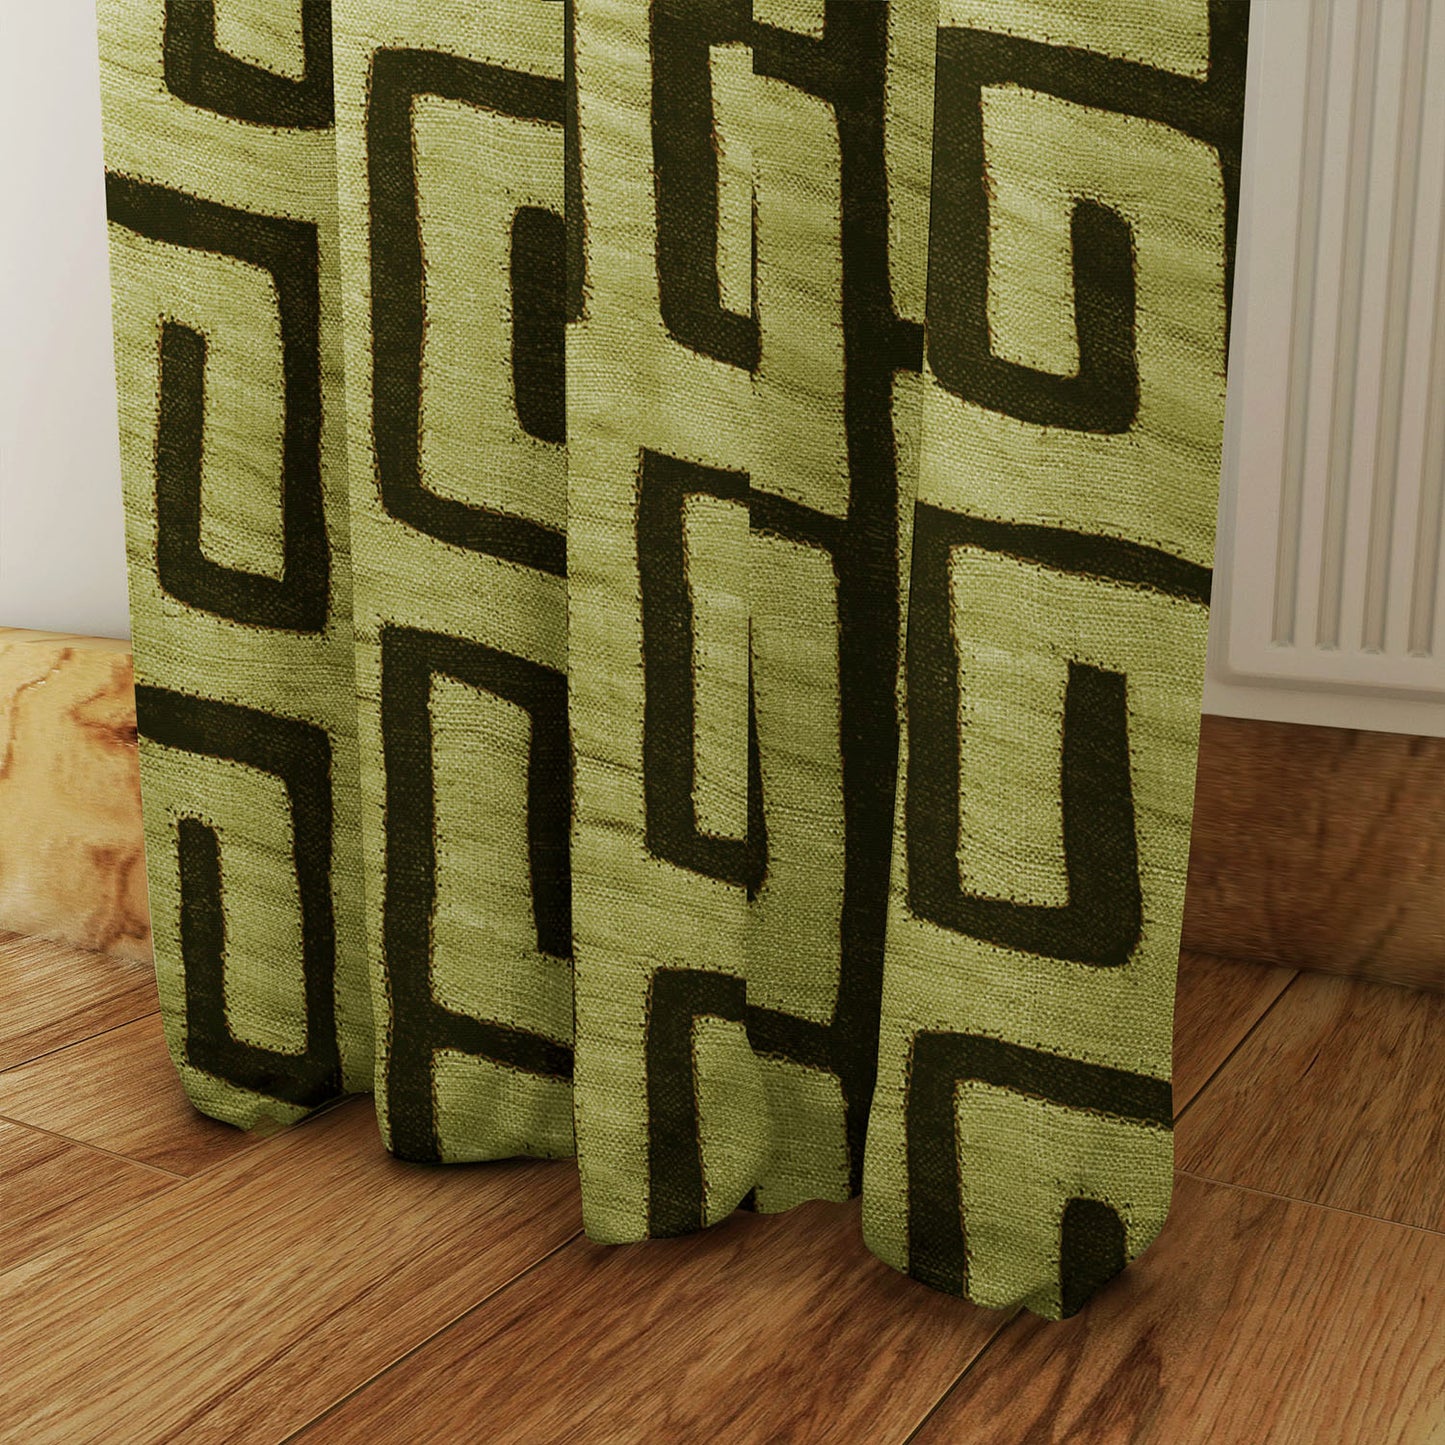 Afro Boho Curtains with Blackout in Traditional Kuba Cloth Design - Chartreuse Green